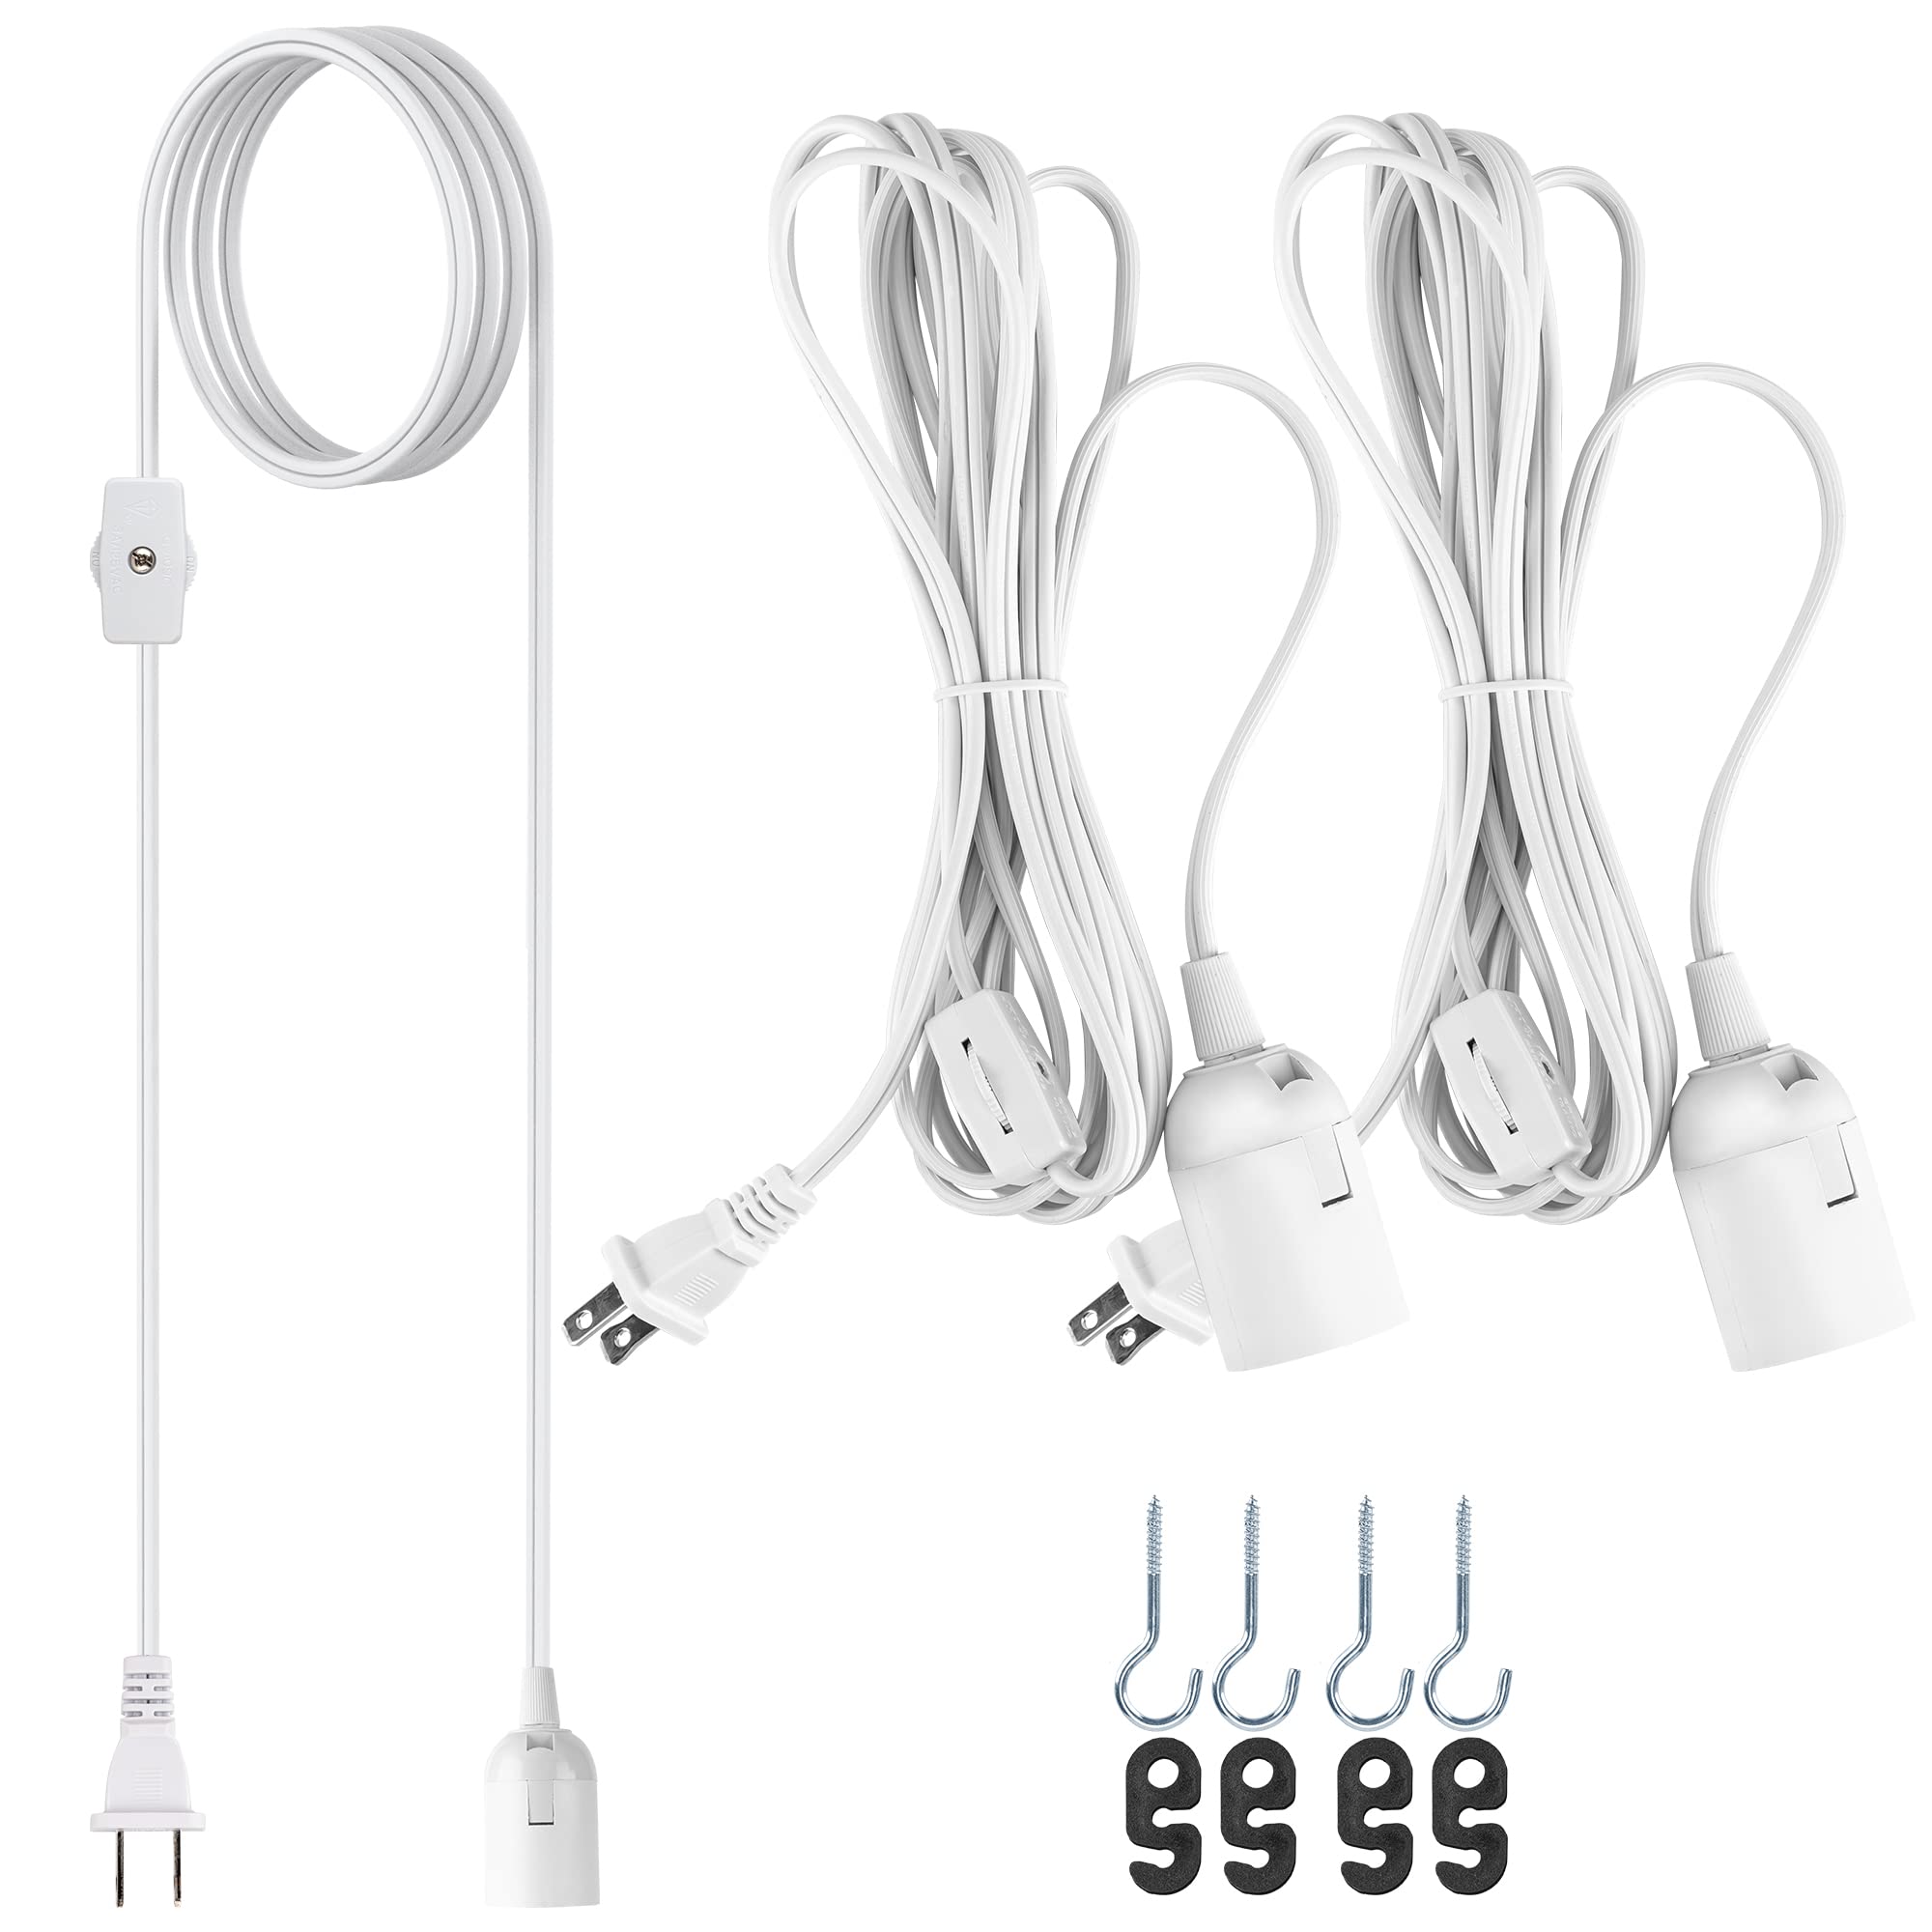 Book Cover JACKYLED Extension Hanging Lantern Cord Cable UL 2-Pack 12Ft 360W with E26 E27 Socket Gear Switch + Hooks + 2-Prong US AC Power Plugs, Extra Lighting for Garage, Closet, Dark Corner, Plants 2 12Ft-White(switch near the plug)